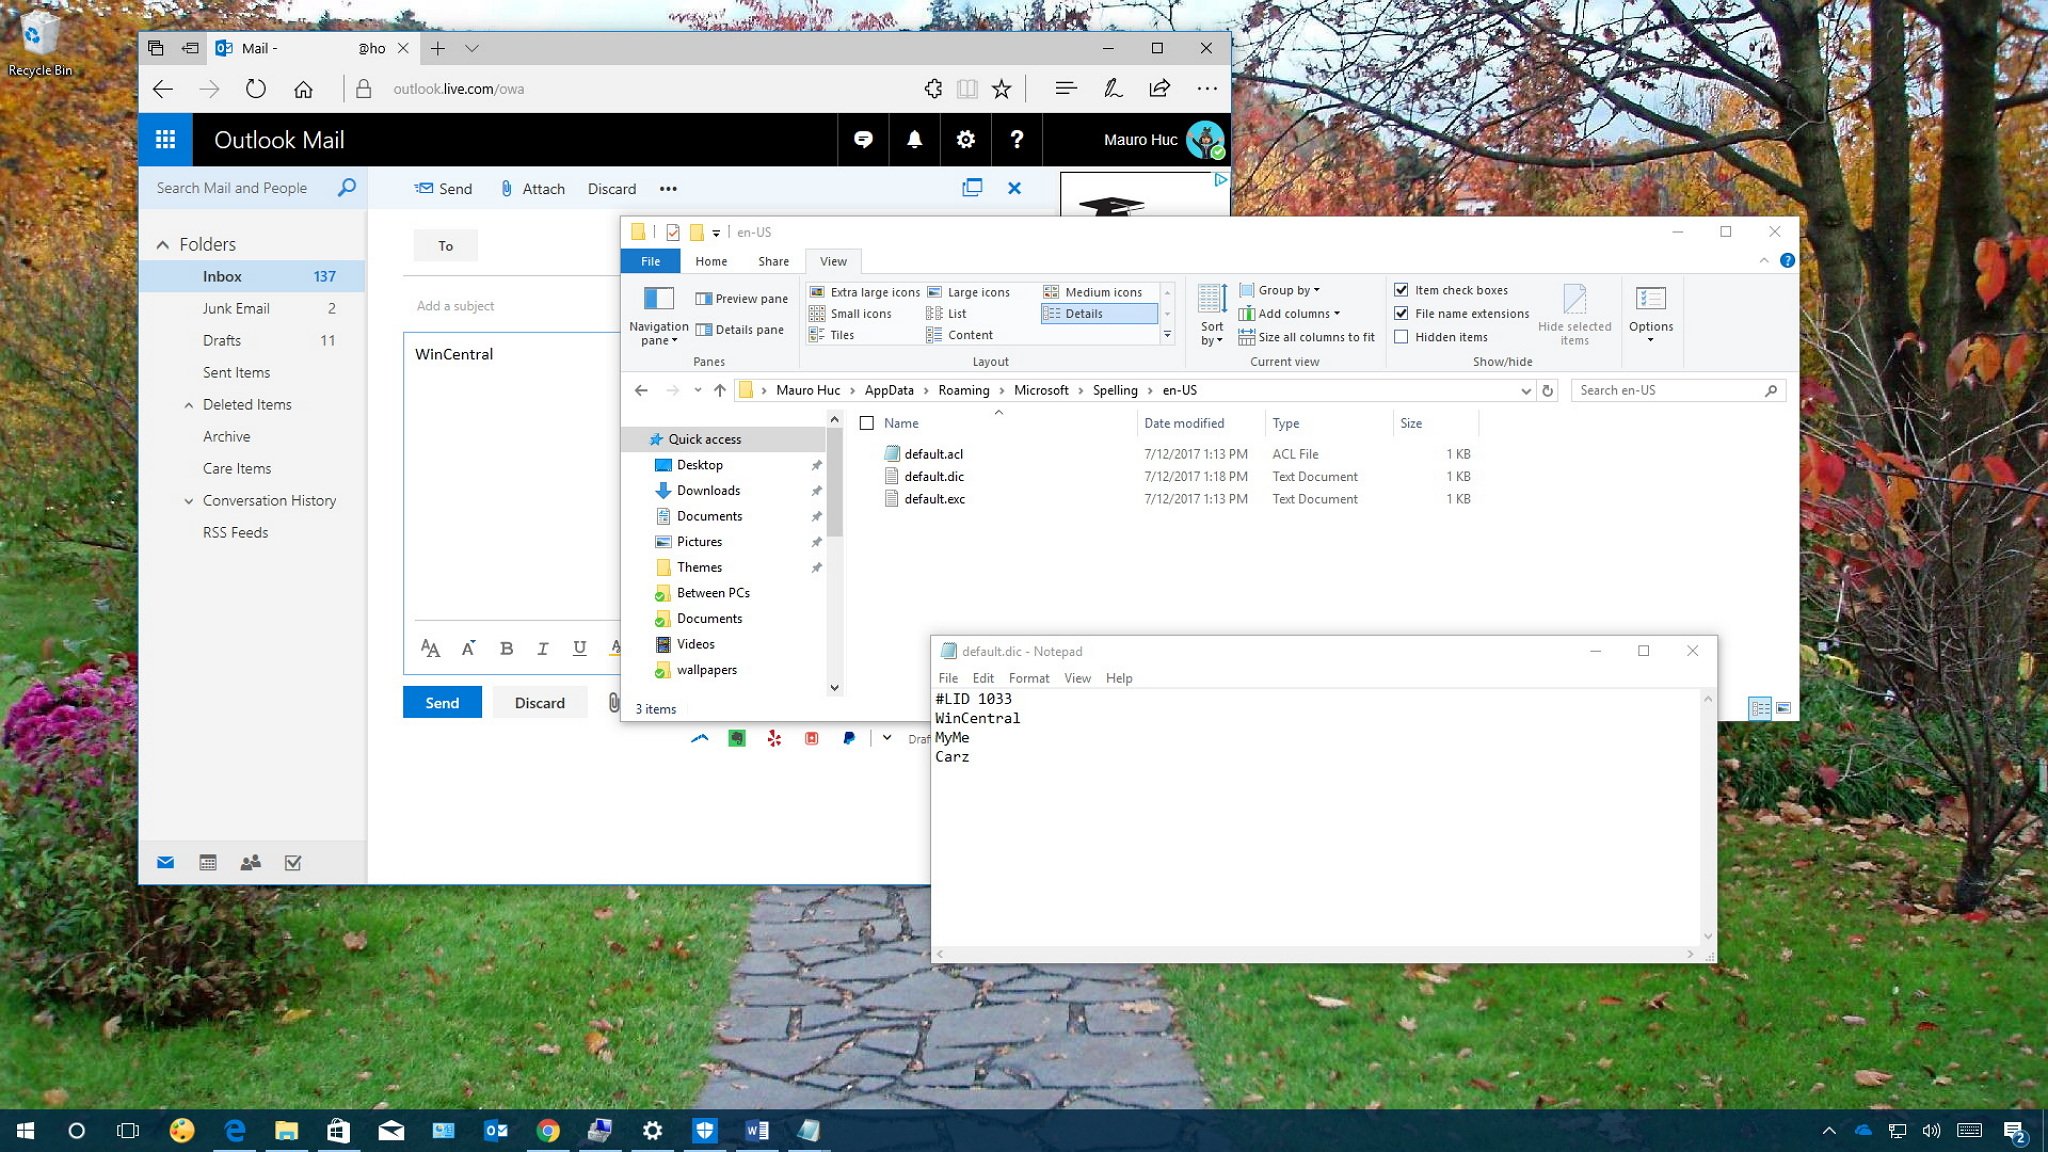 How To Edit The Custom Spell Check Dictionary On Windows 10